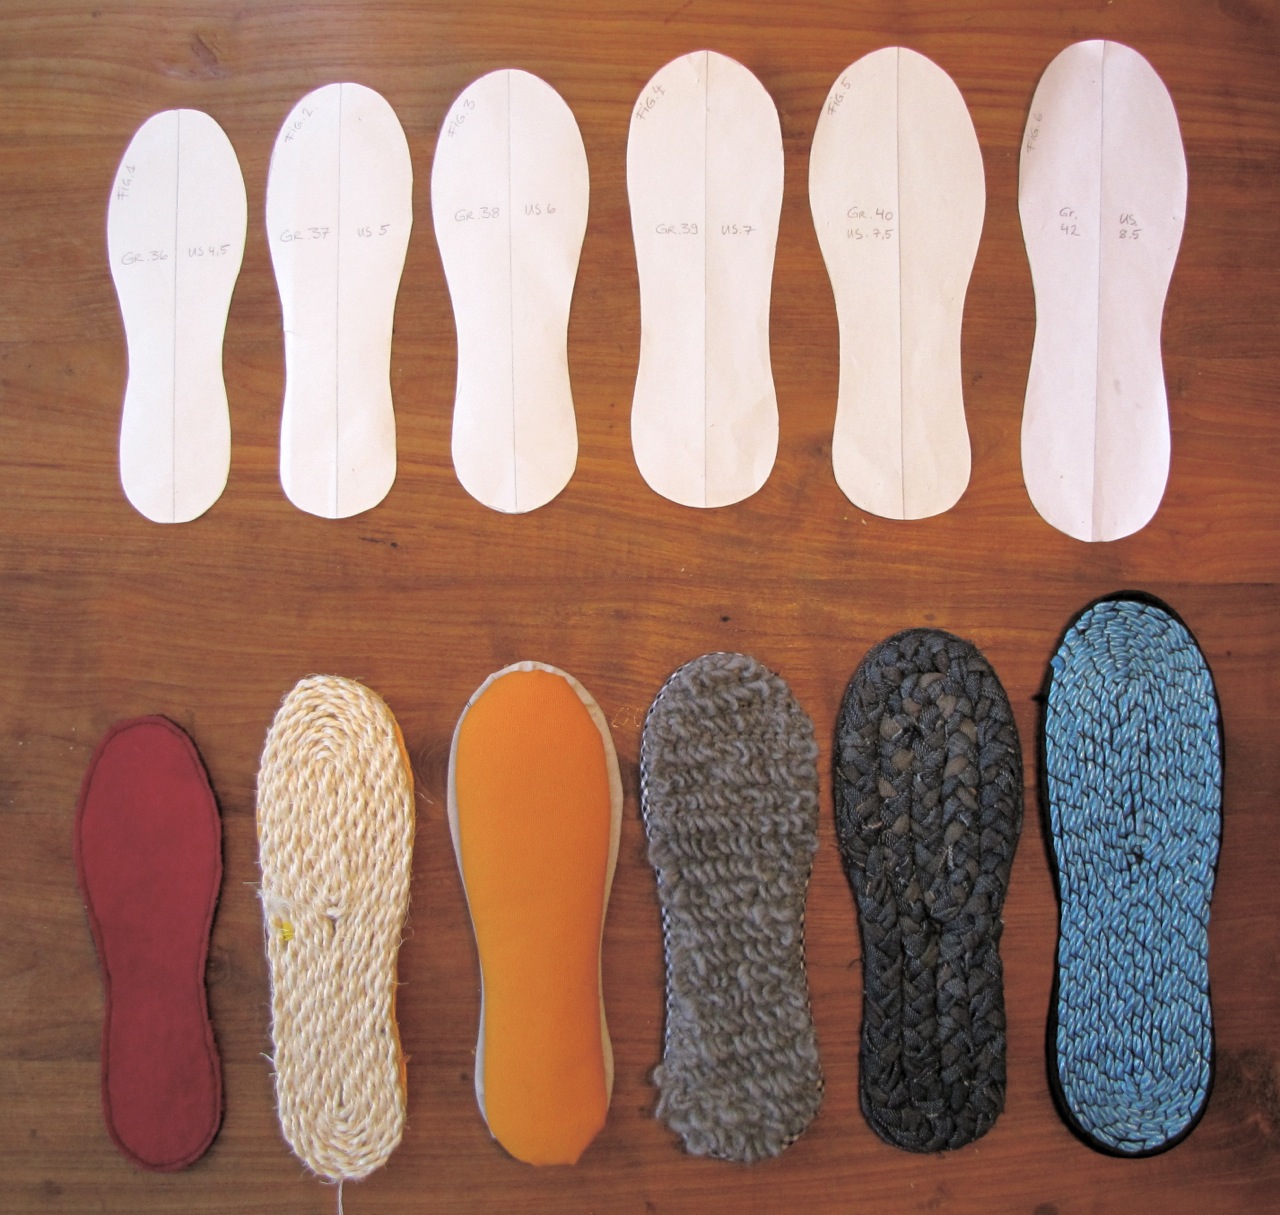 Stue Effektivitet Male Of Dreams and Seams: Shoe Shortage! Making Soles for House Shoes